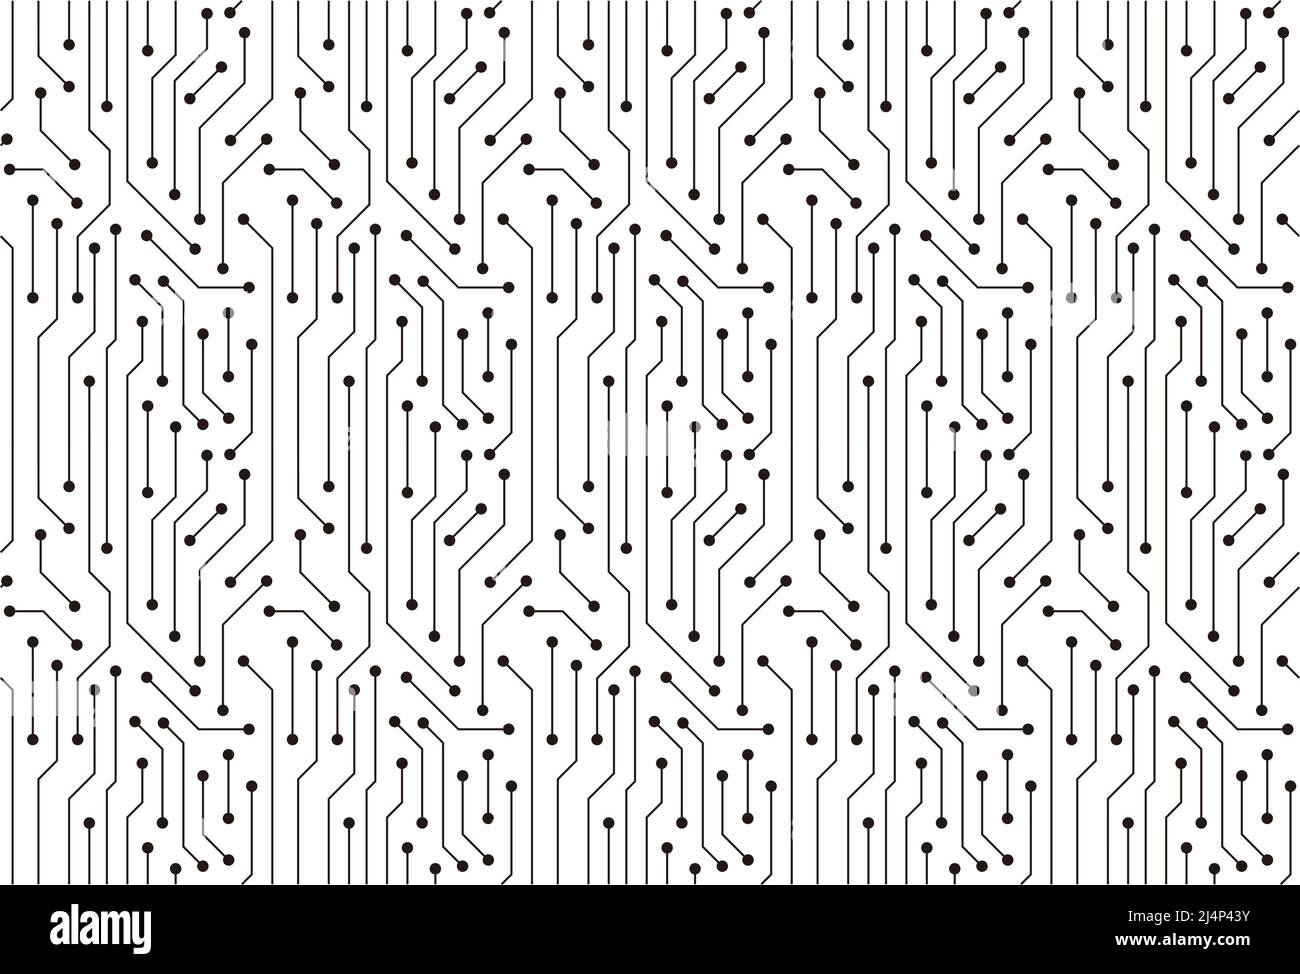 Circuit Board texture Background, seamless pattern Stock Vector